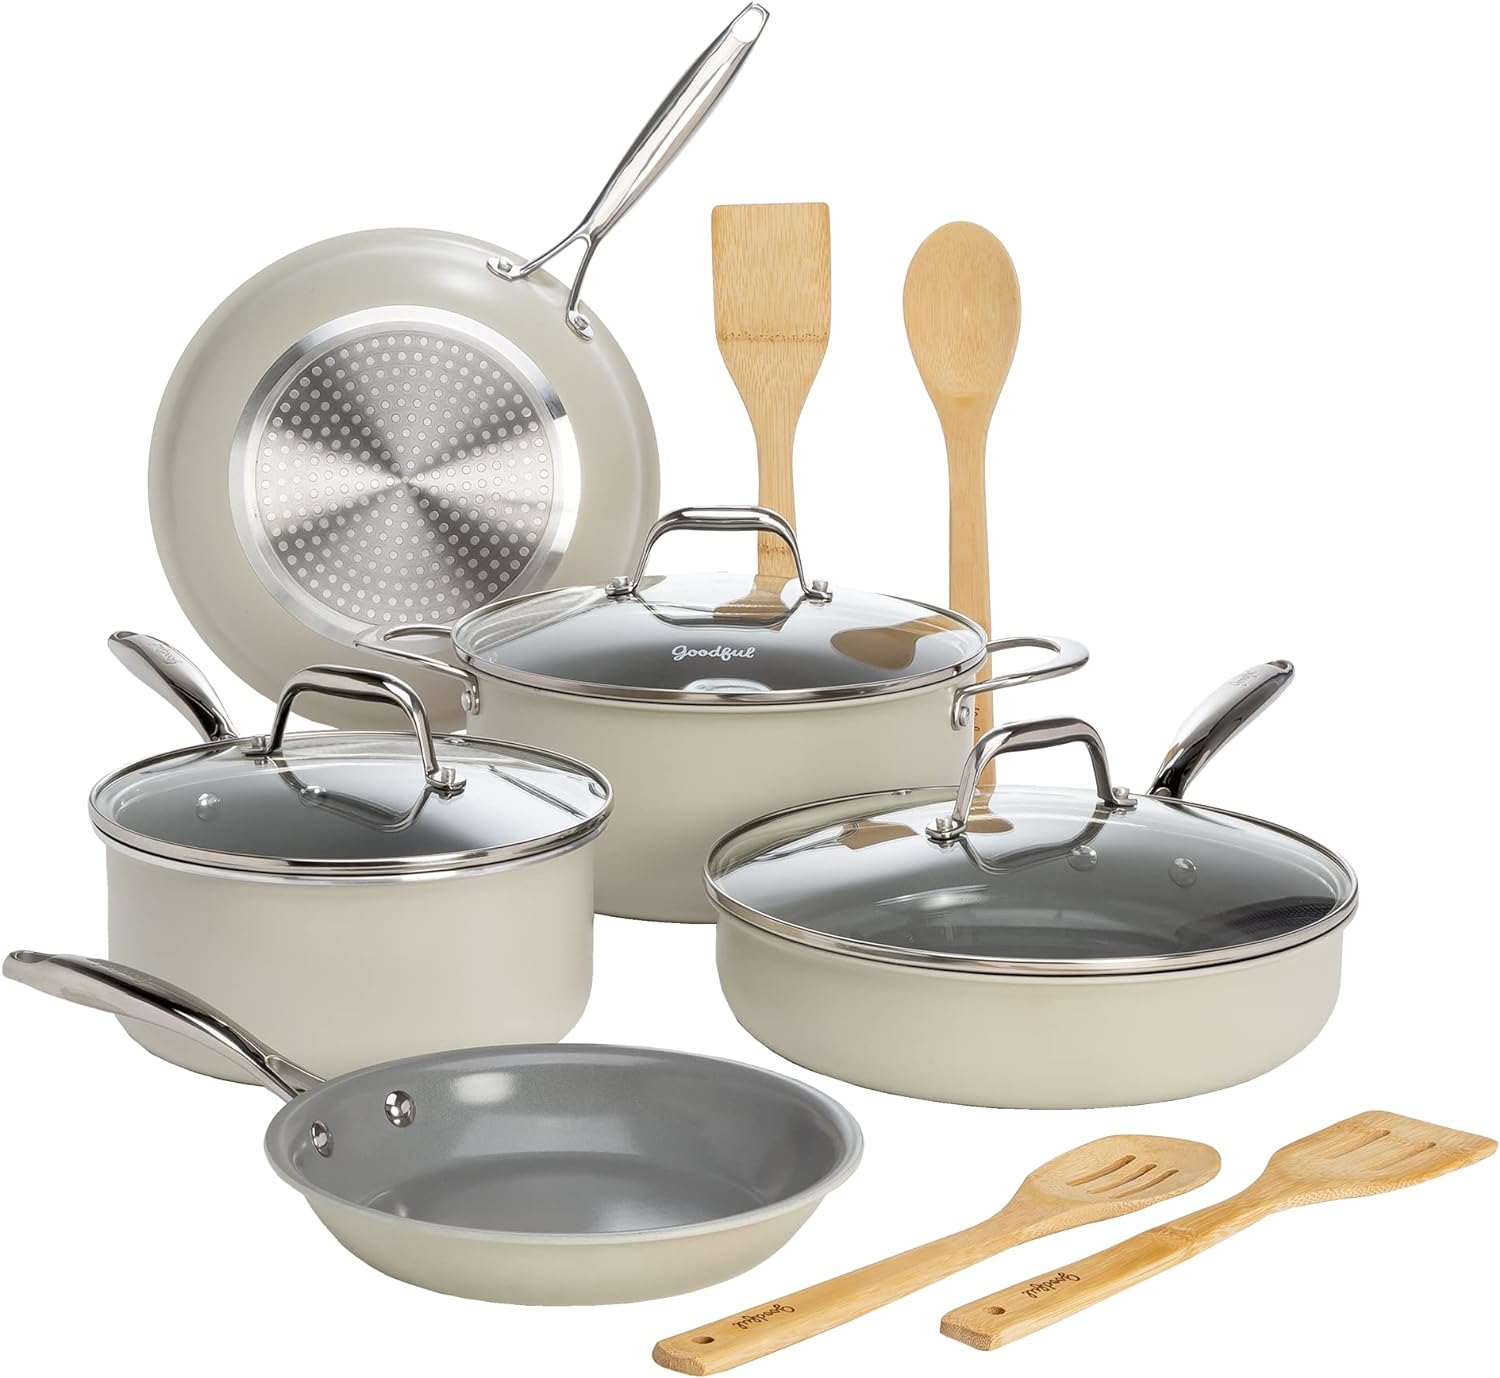 Goodful Ceramic Nonstick Pots and Pans Set Review